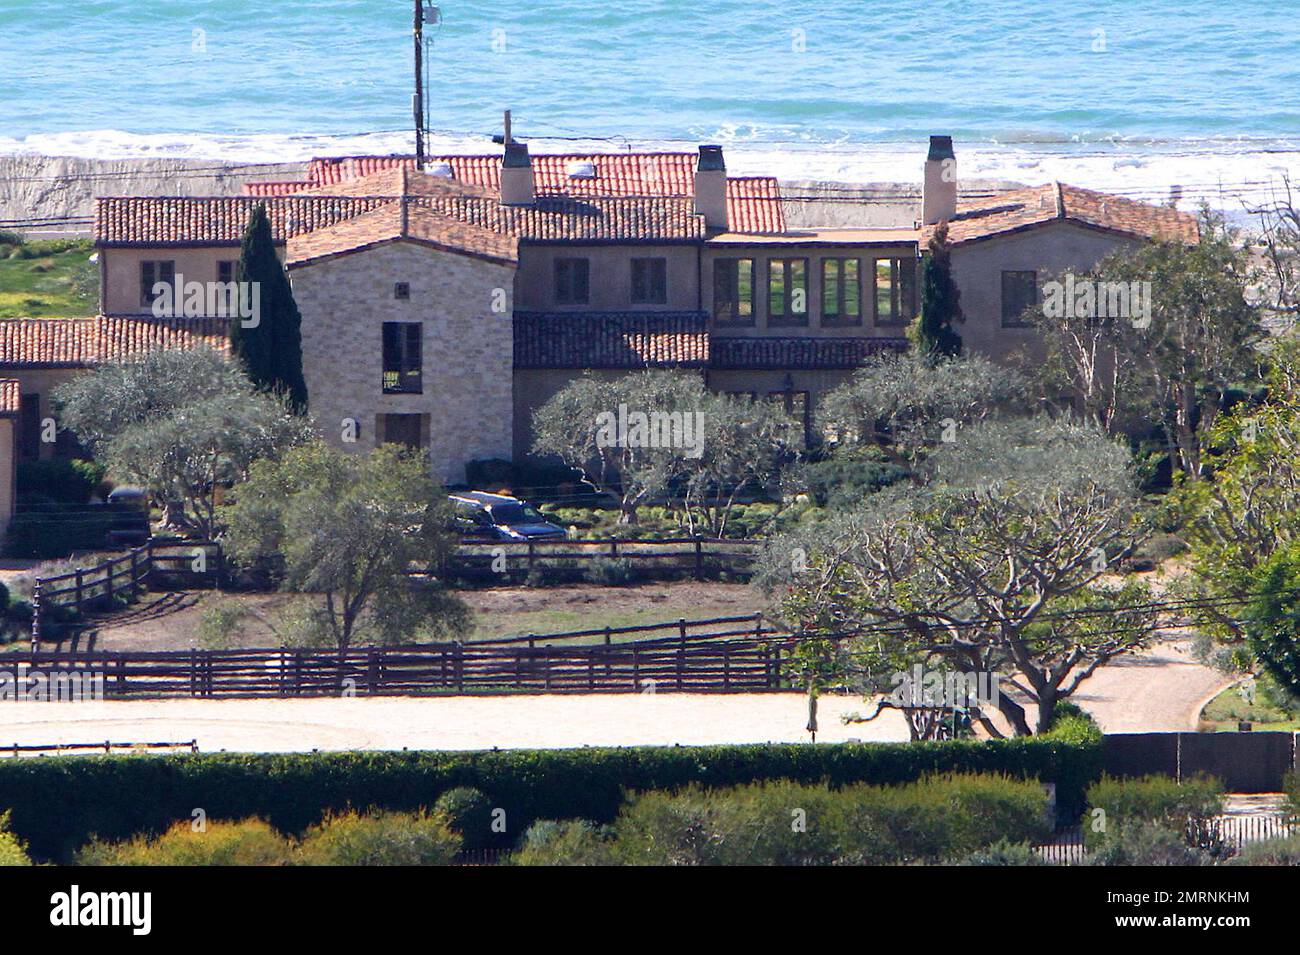 General views of Lady Gaga's Malibu home. The five bedroom, twelve bathroom Mediterranean-style villa is worth $23 million and boasts a saltwater swimming pool with spa, a luxury stable and dressage ring, and a two lane Brunswick bowling alley. The 10,270 square feet home also contains a safe room above the main floor. Stock Photo